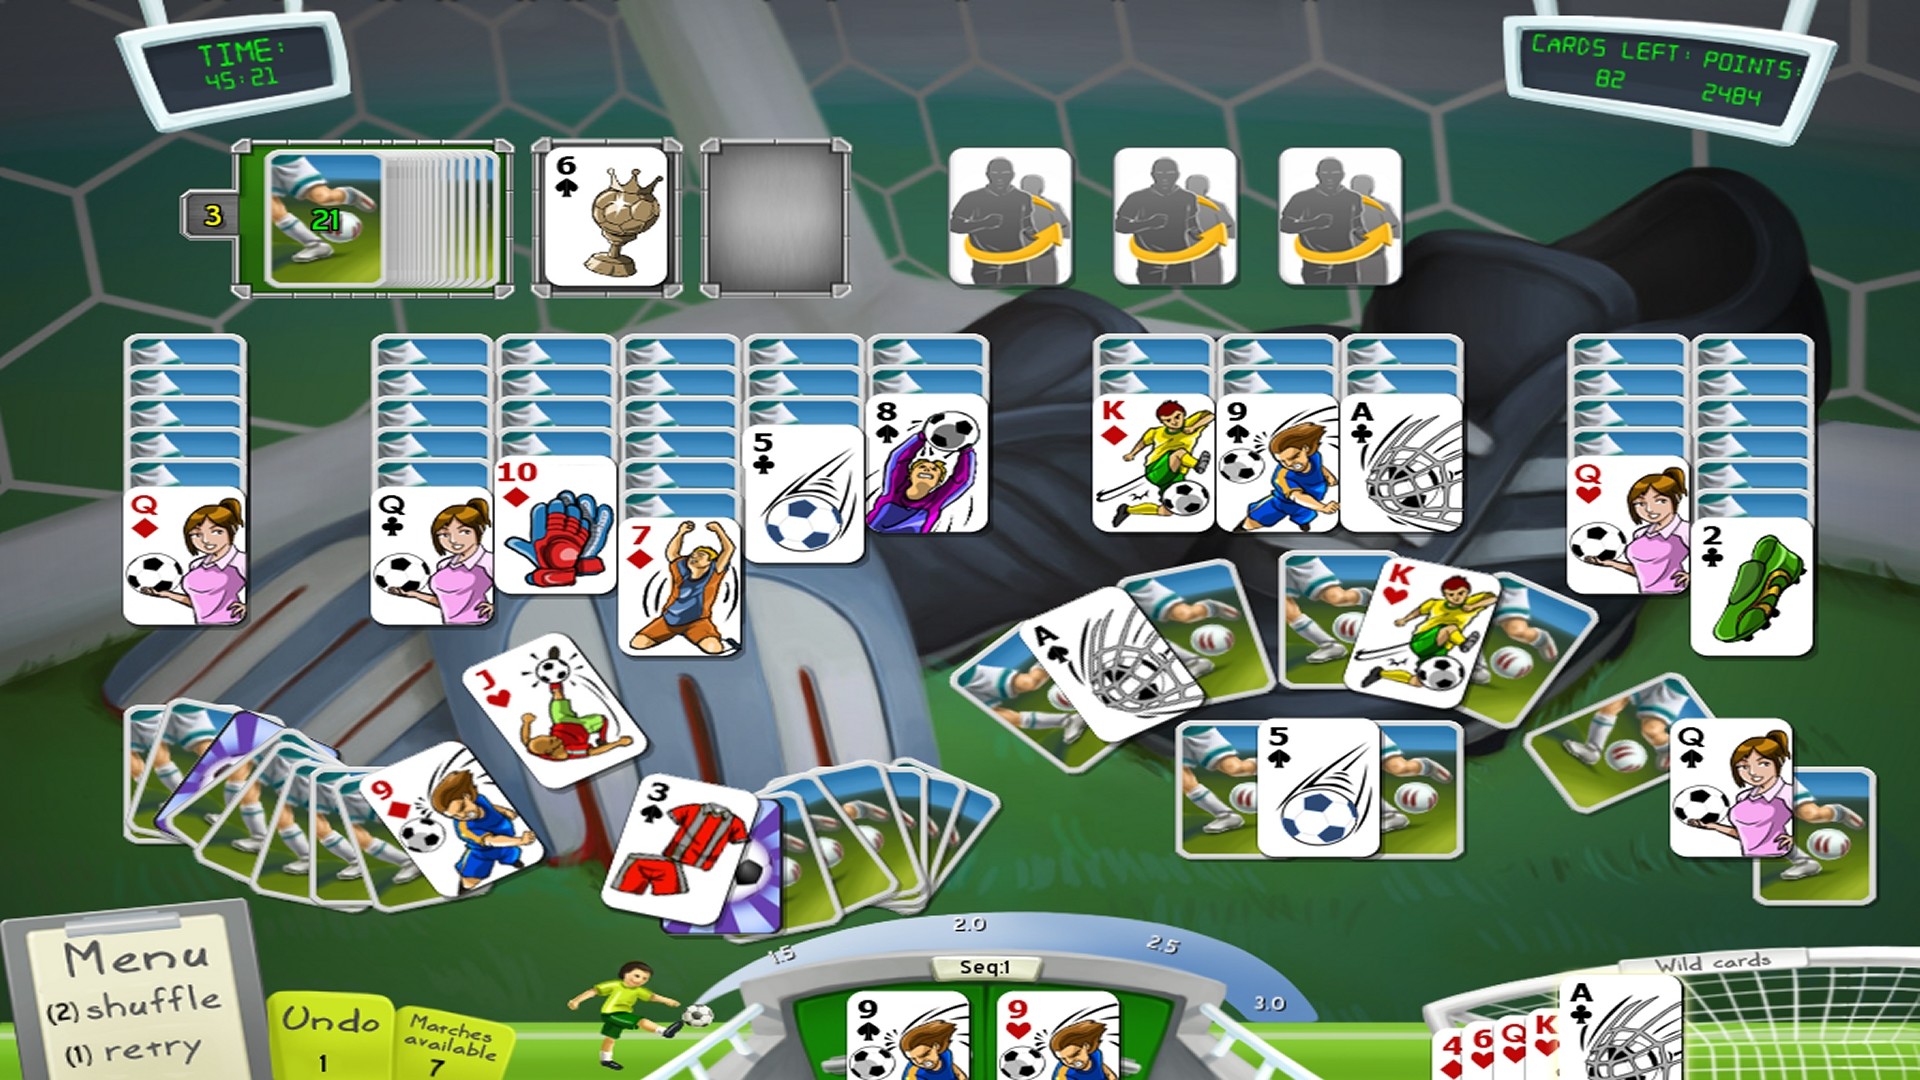 Soccer Cup Solitaire Free Download